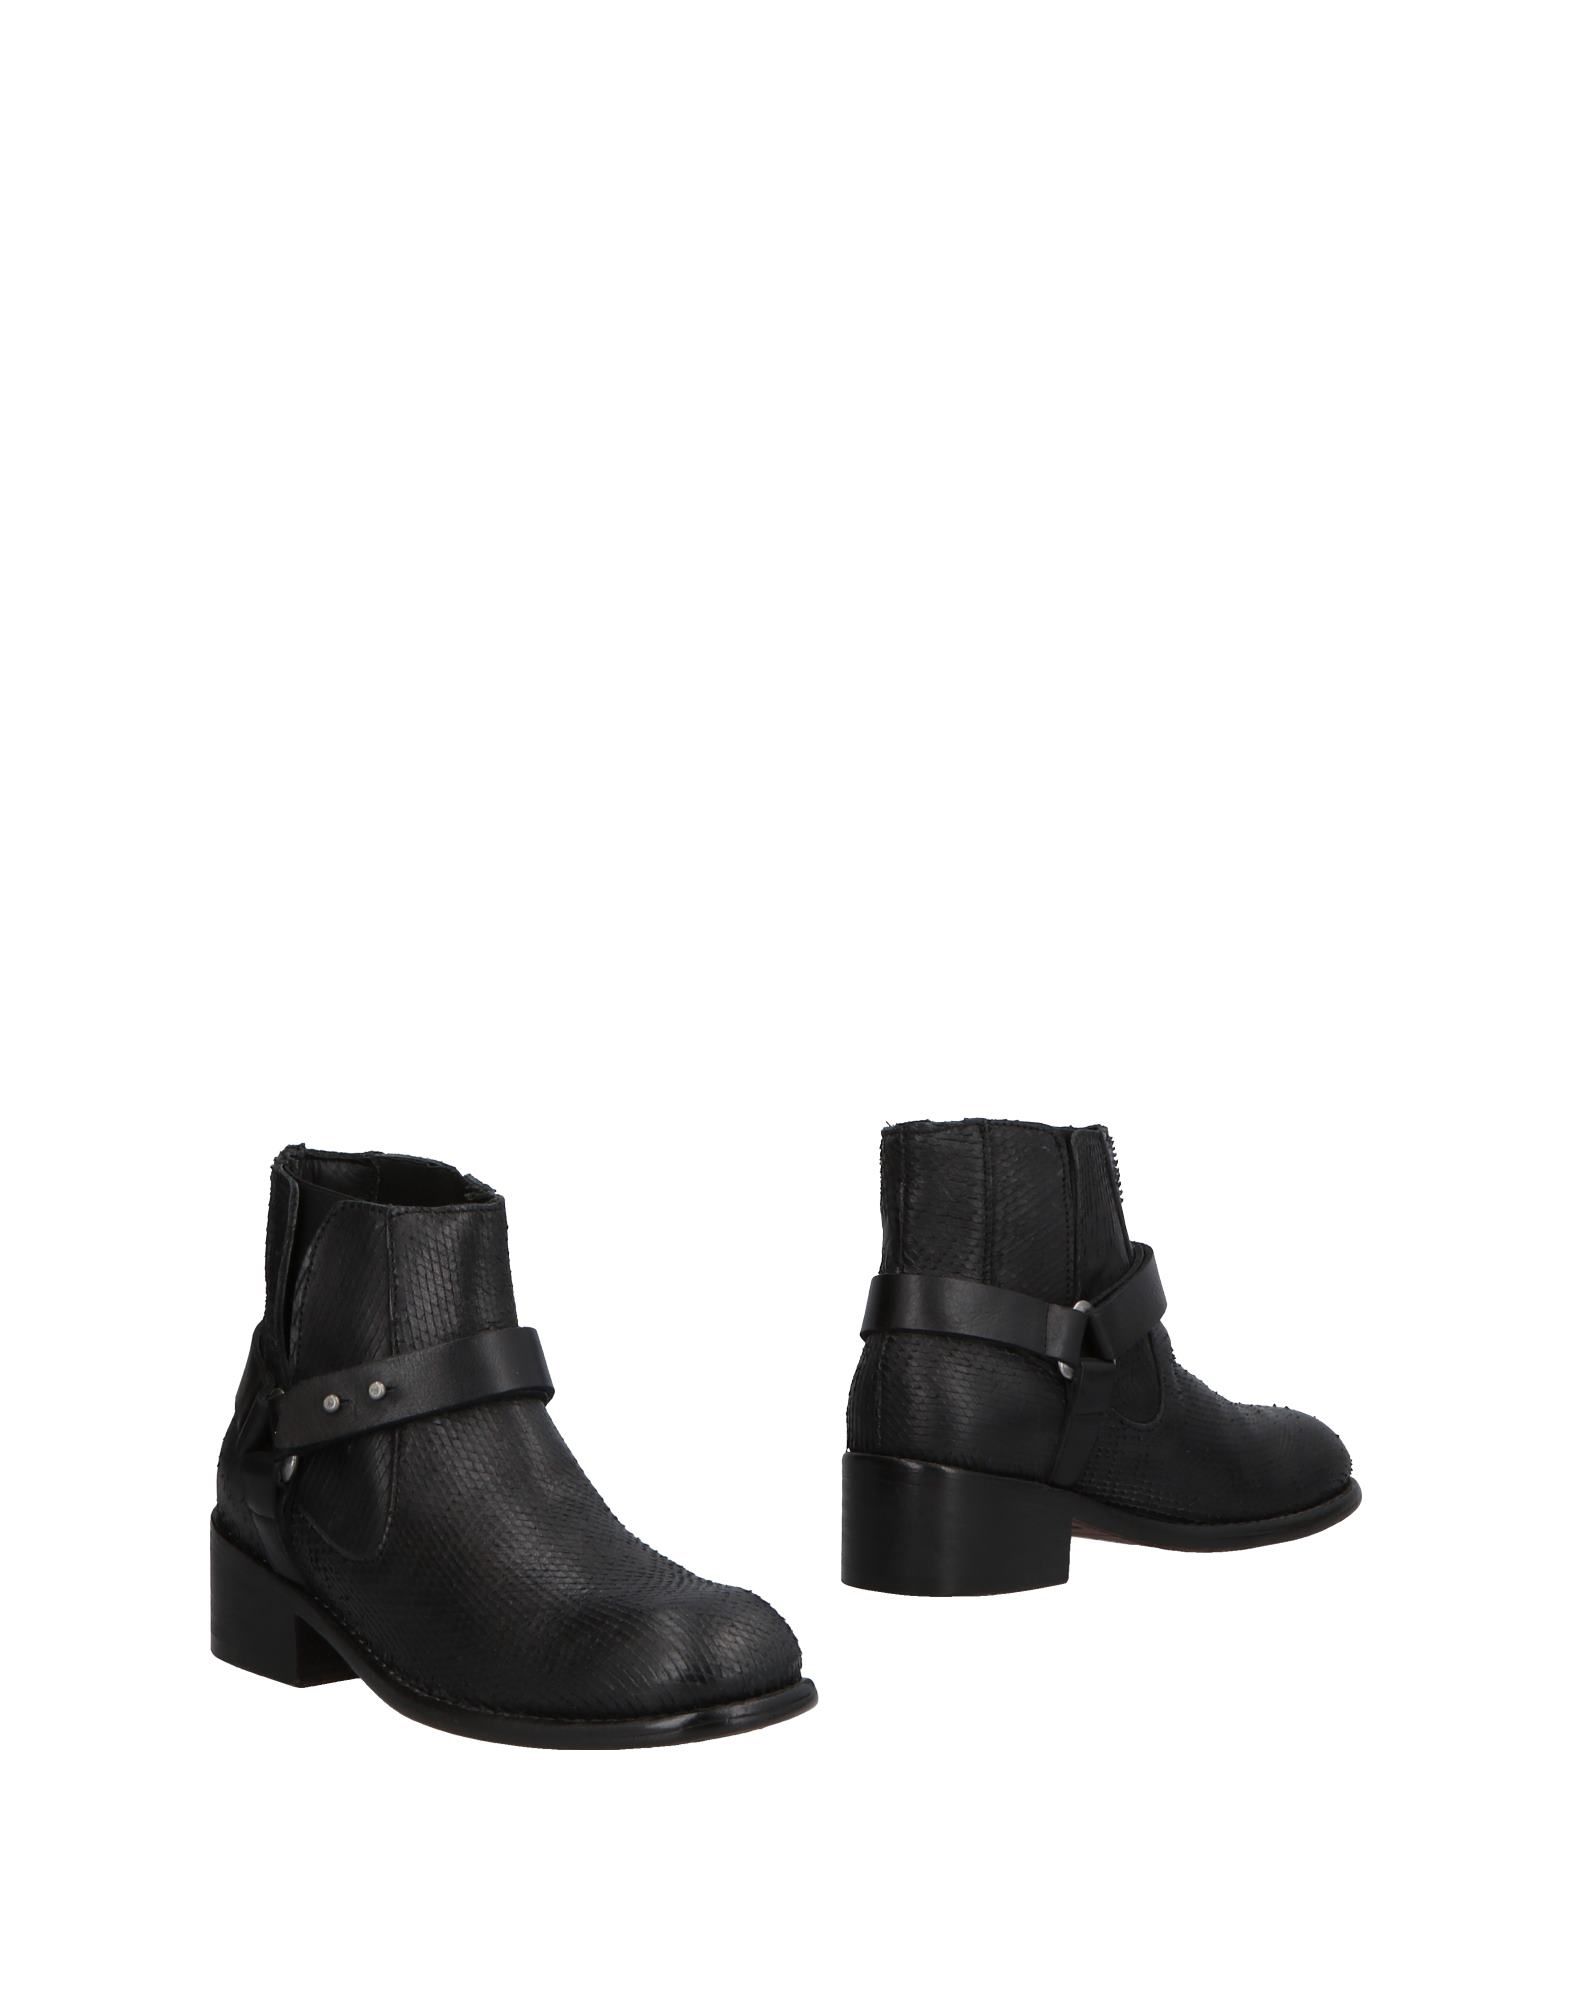 CATARINA MARTINS Ankle boot,11506991DQ 11